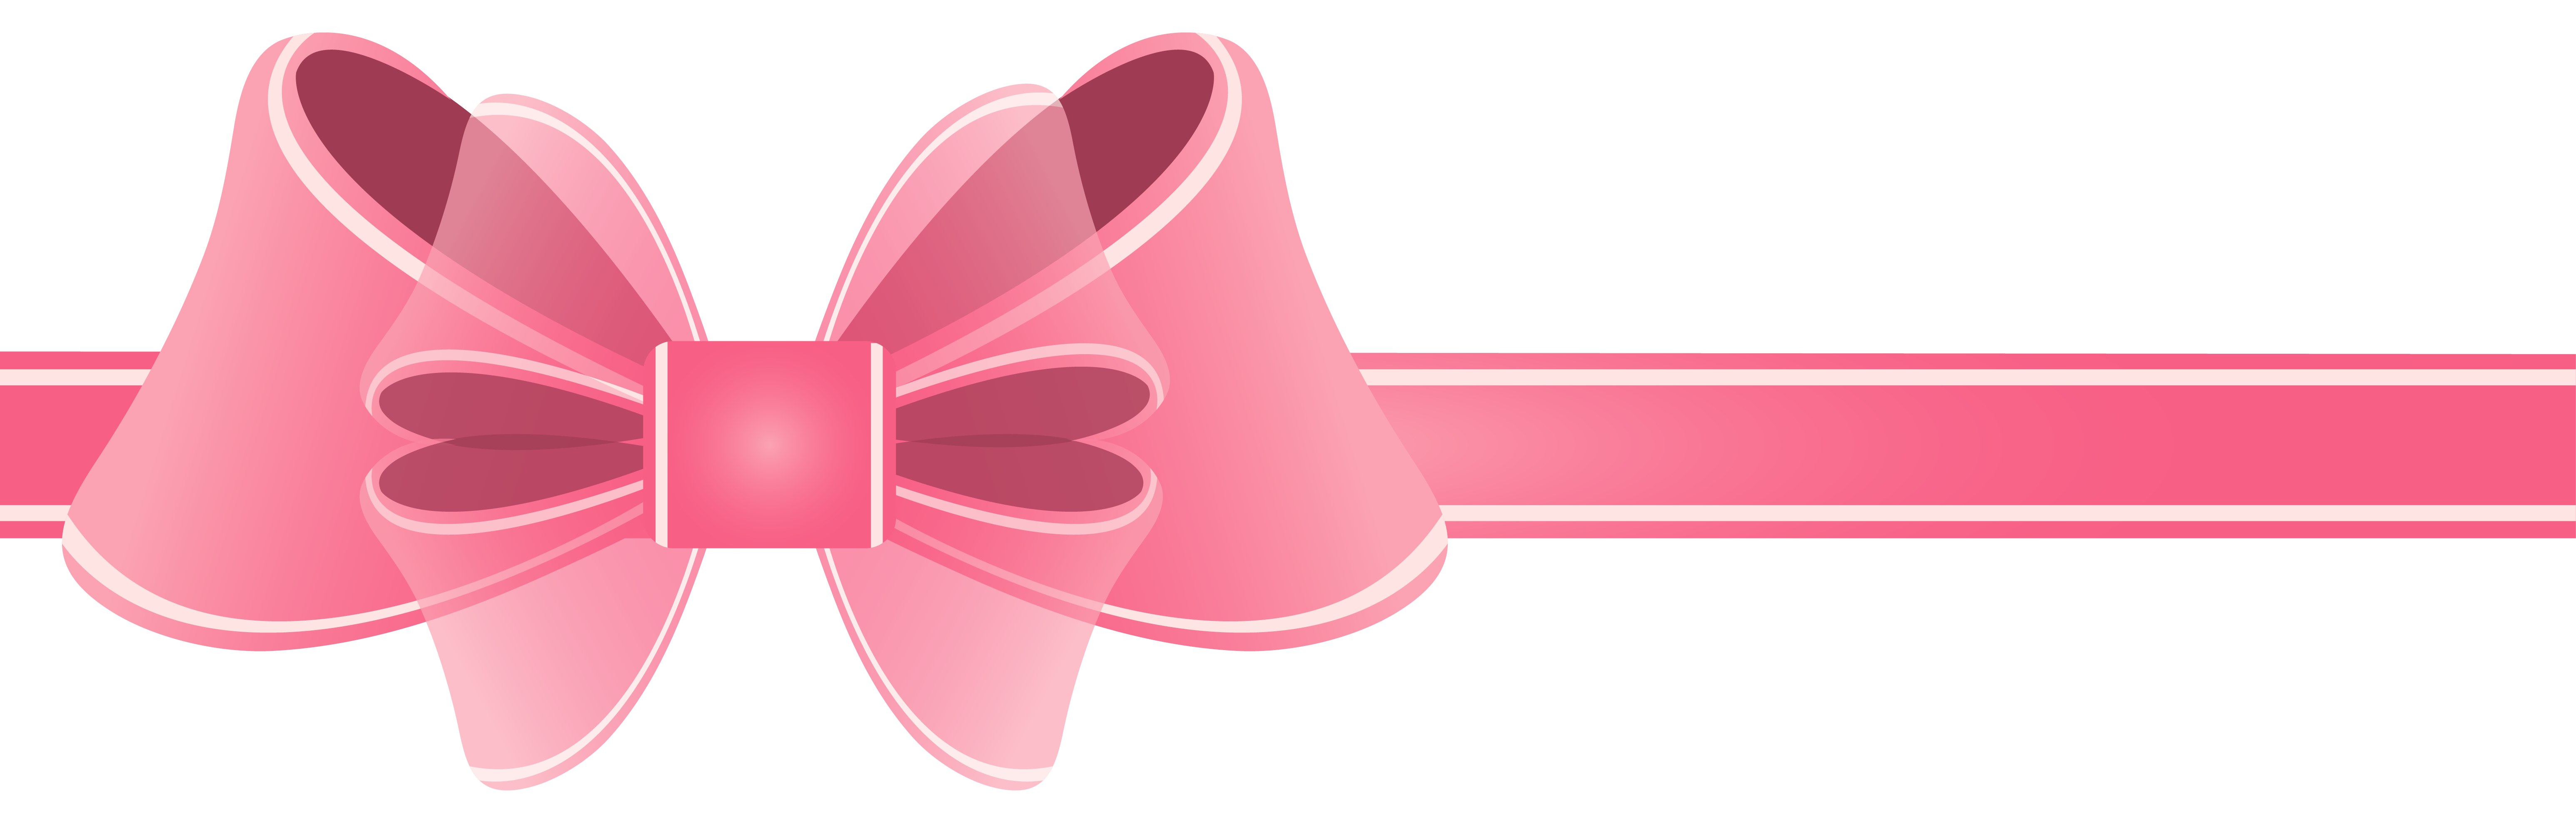 Ribbon png picture gallery. Wing clipart pink